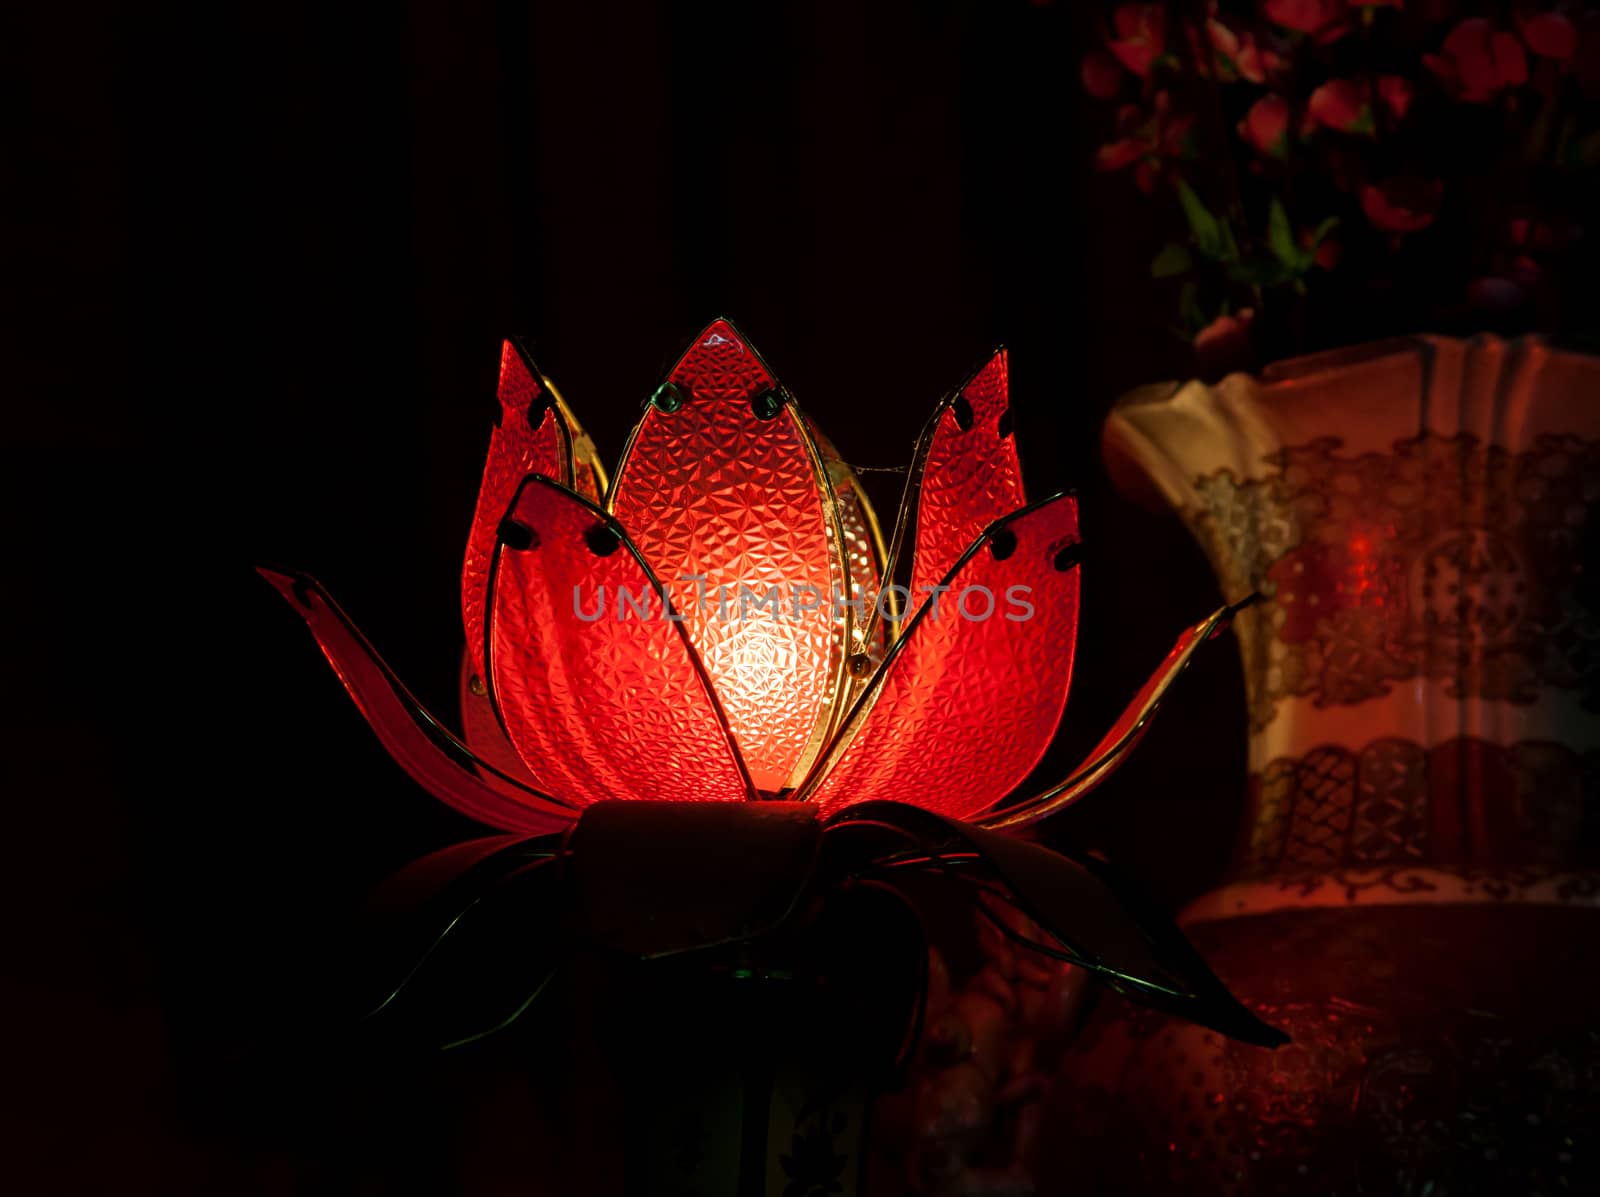 Lotus lamp in a buddhist Temple, Vietnam by Goodday